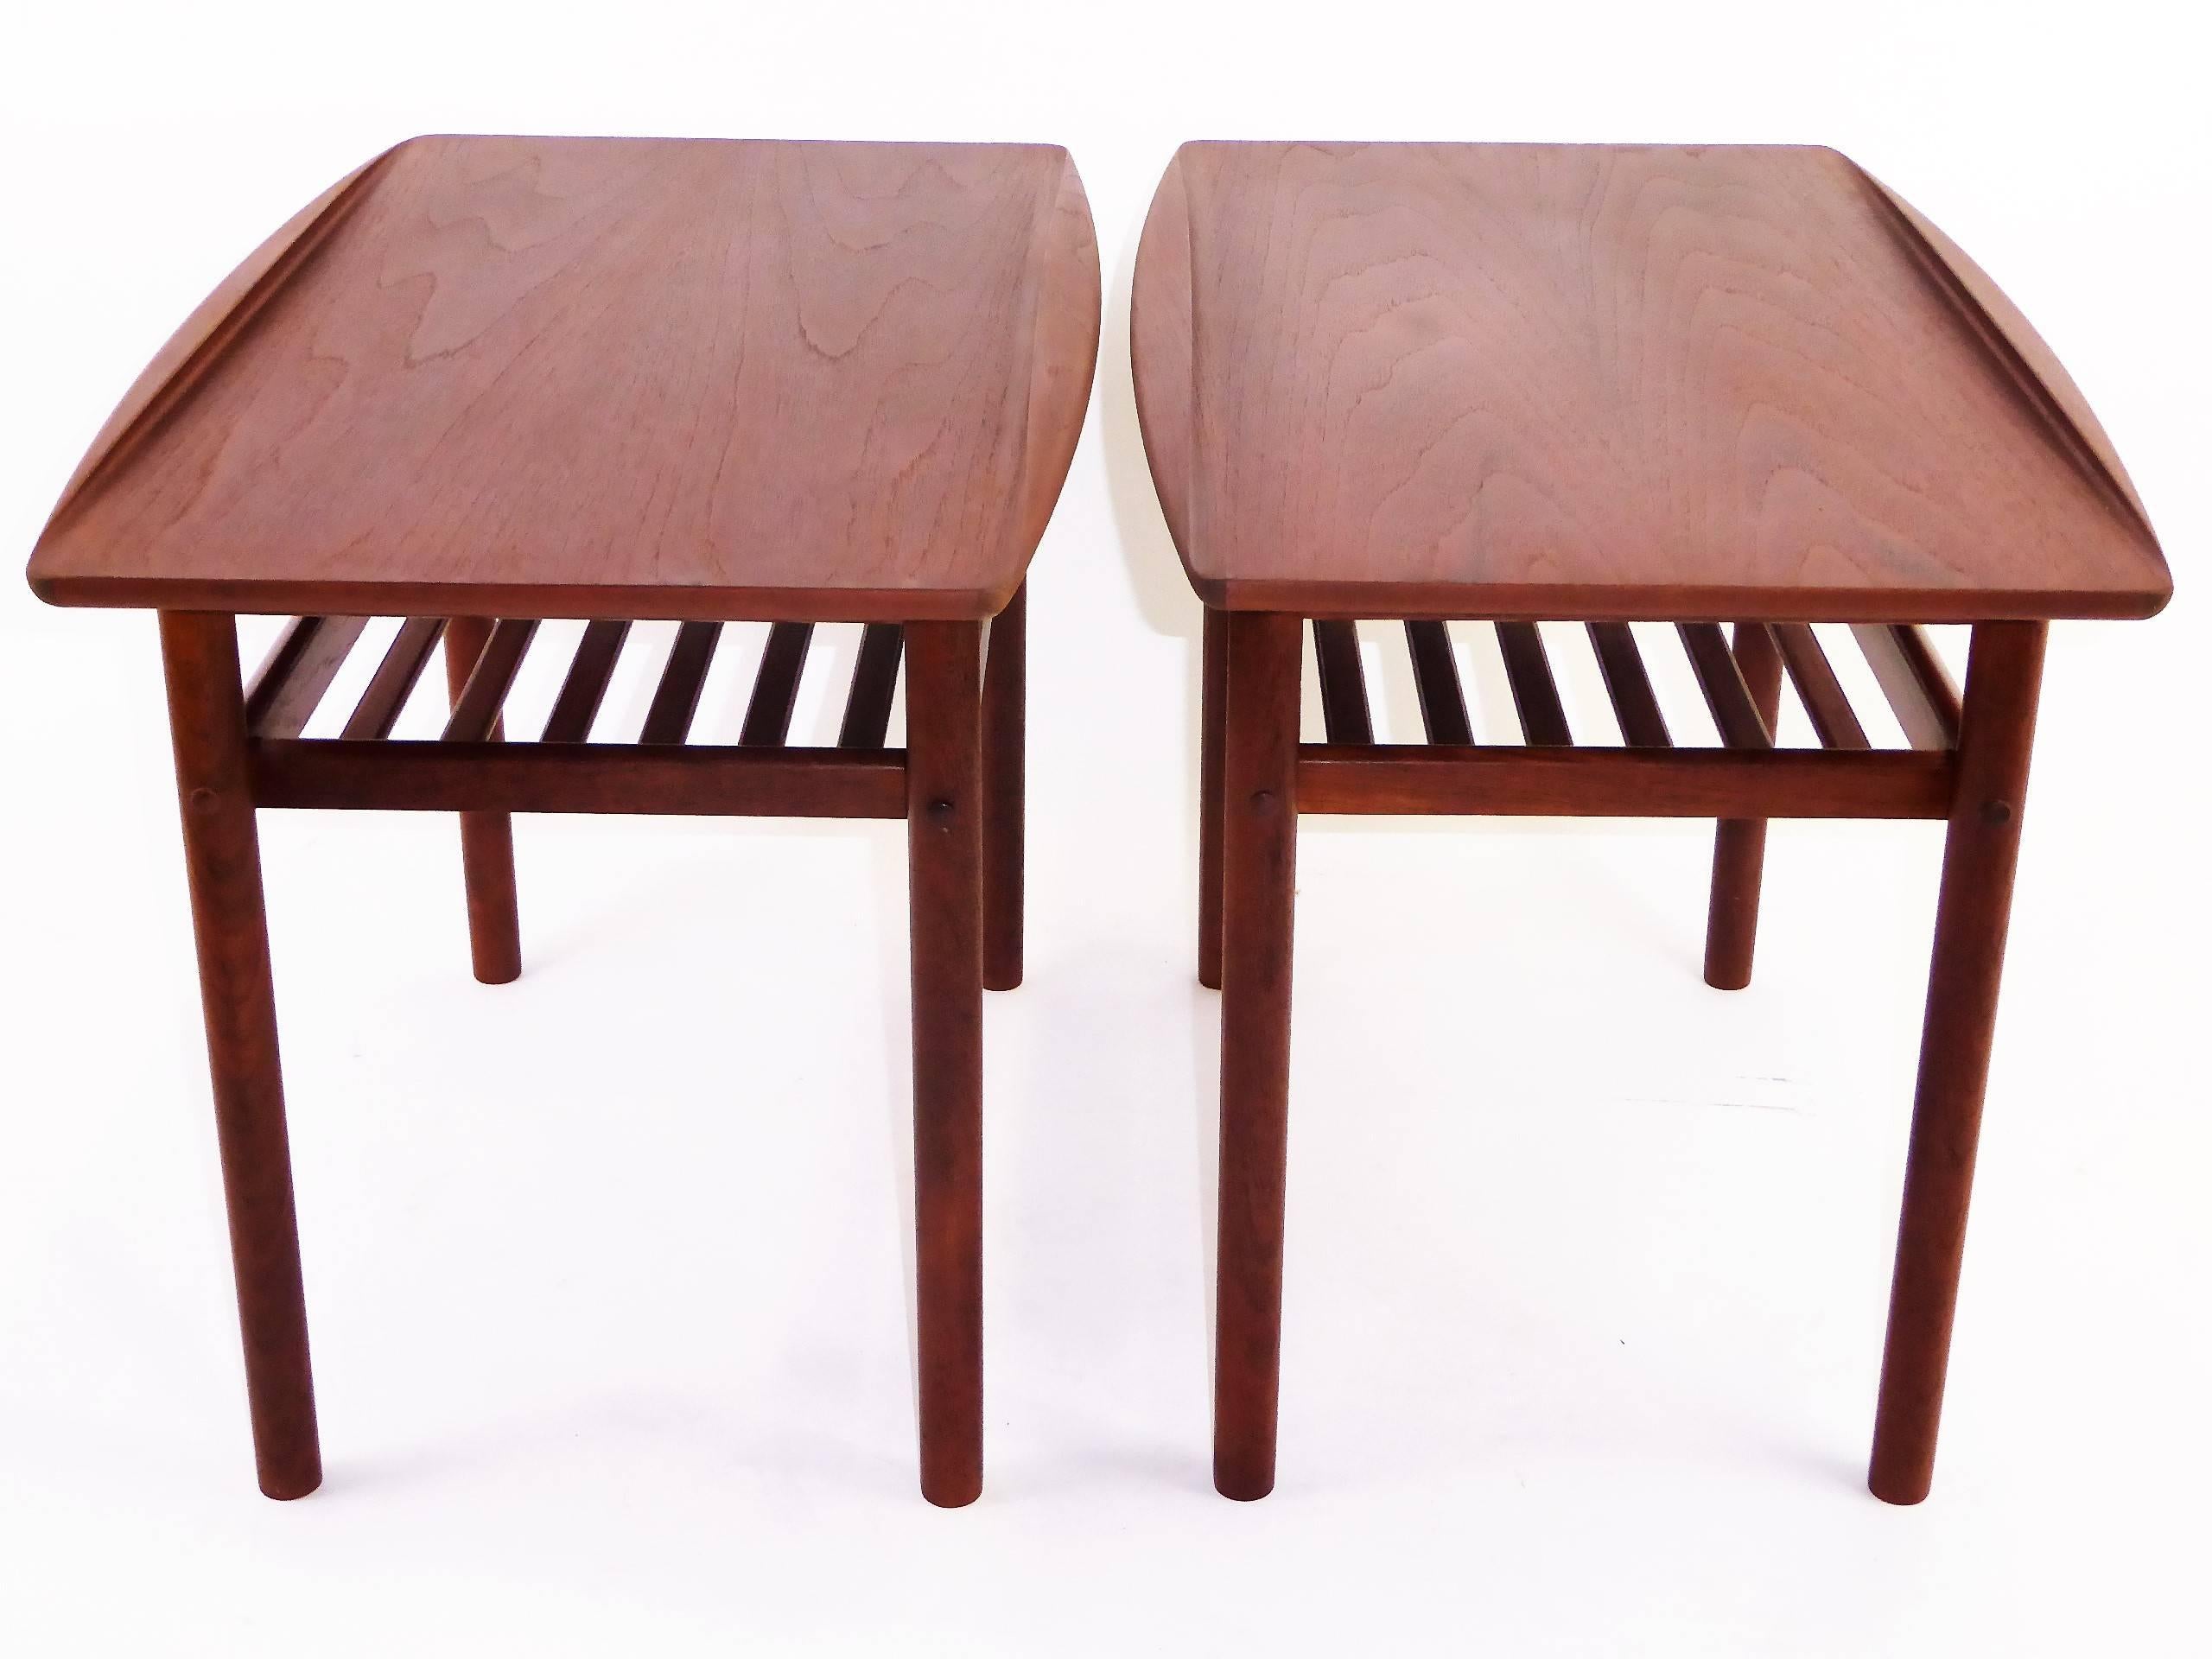 1960s iconic table design by noted Danish designer Grete Jalk and produced by cabinetmaker Poul Jeppesen. Each with a sculpted curled edge and featuring a slatted stretcher shelf. Both have Grete Jalk/Jeppesen labels and Danish Control labels. One